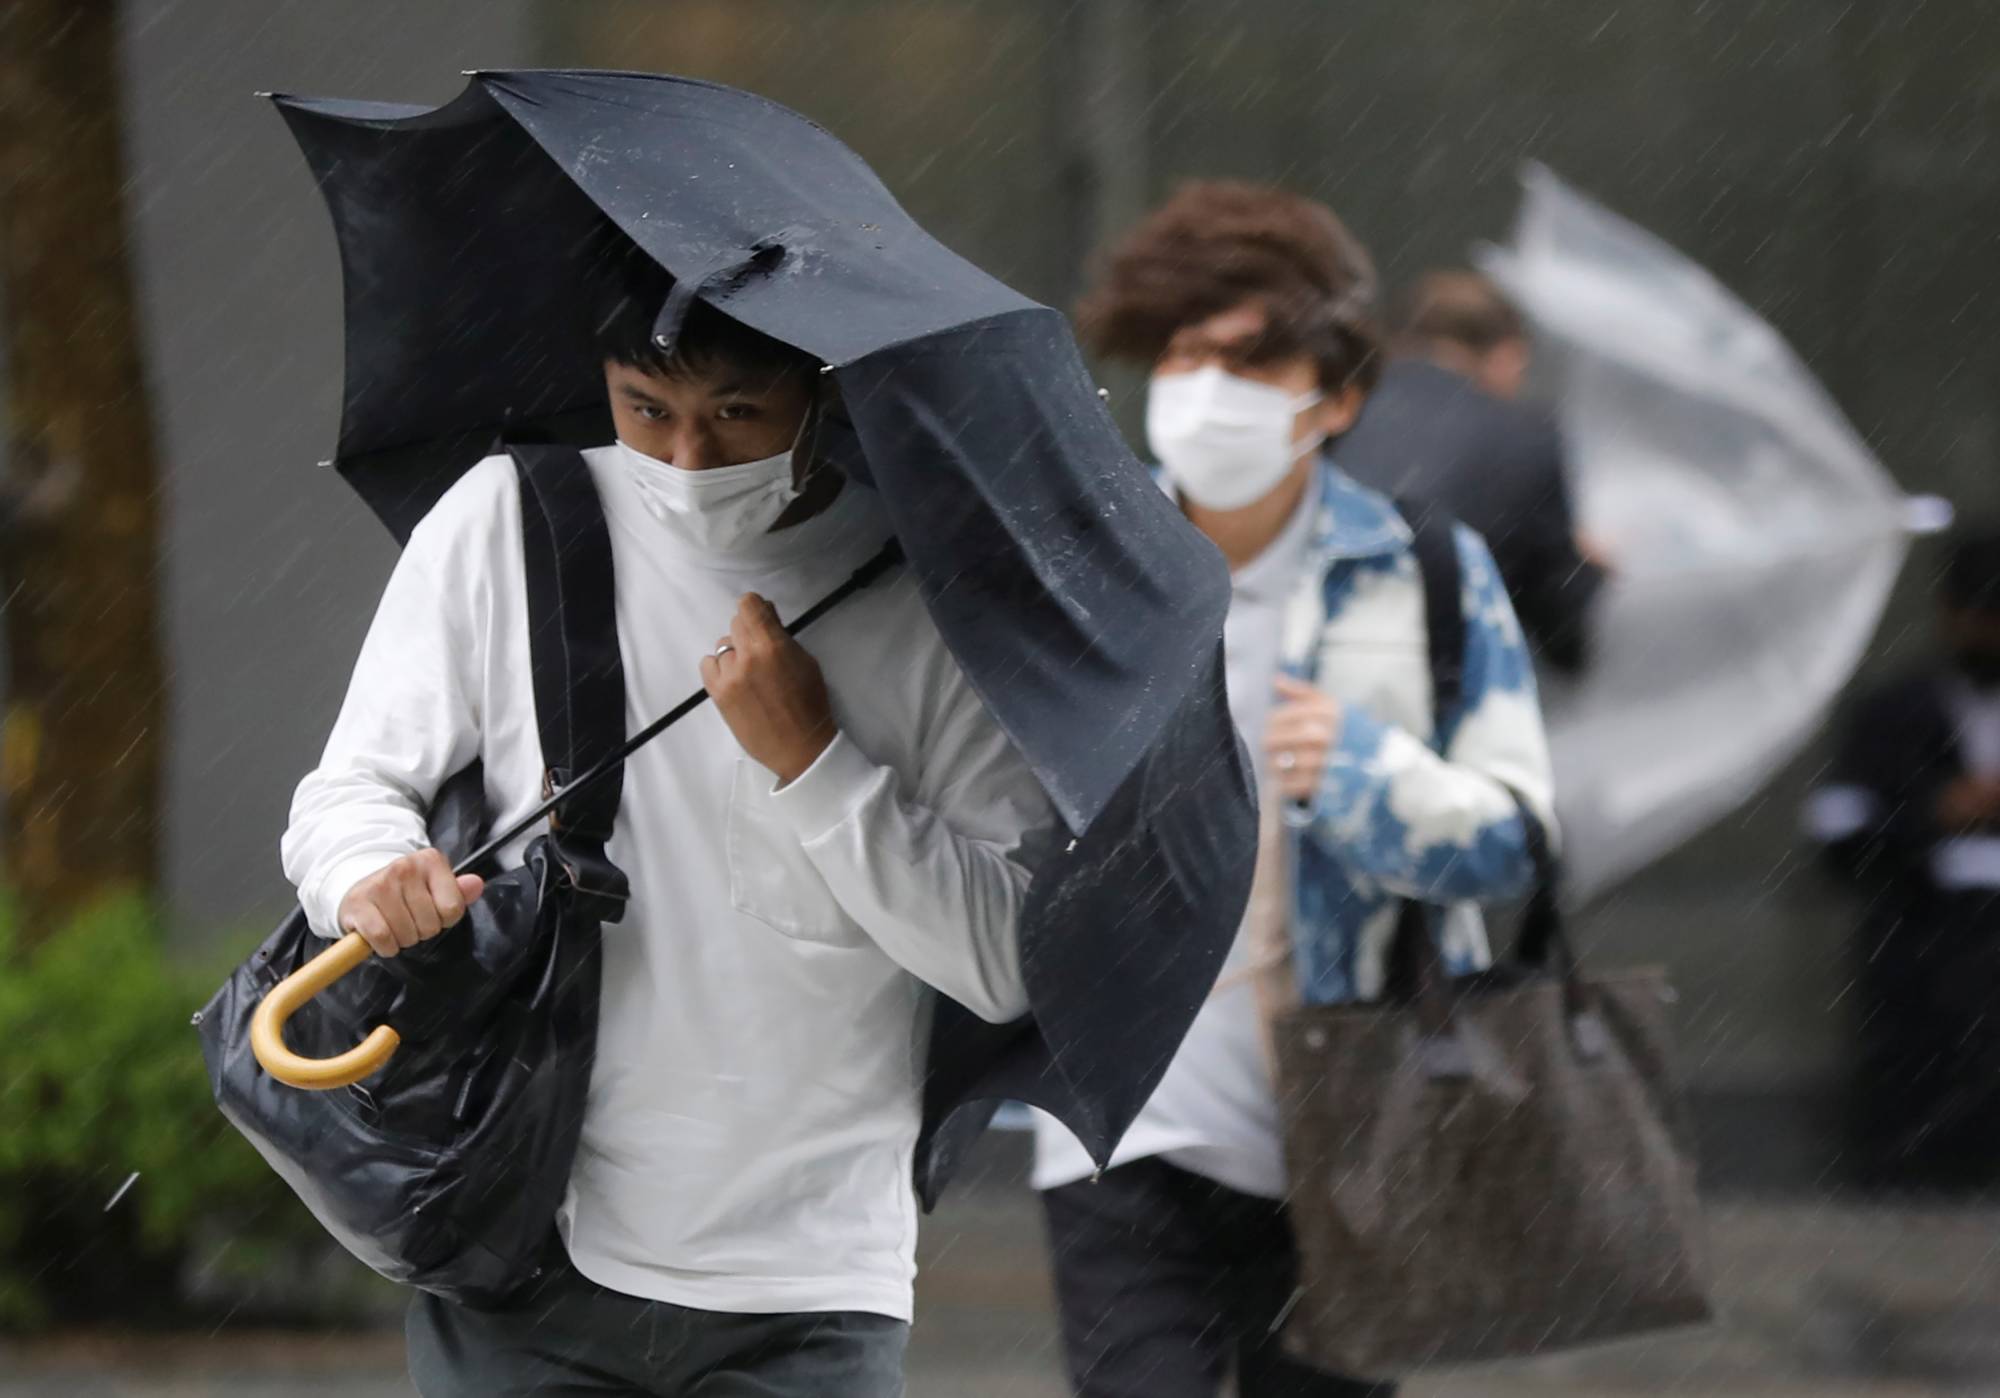 People walk through heavy rain and wind in Tokyo on Friday. | REUTERS